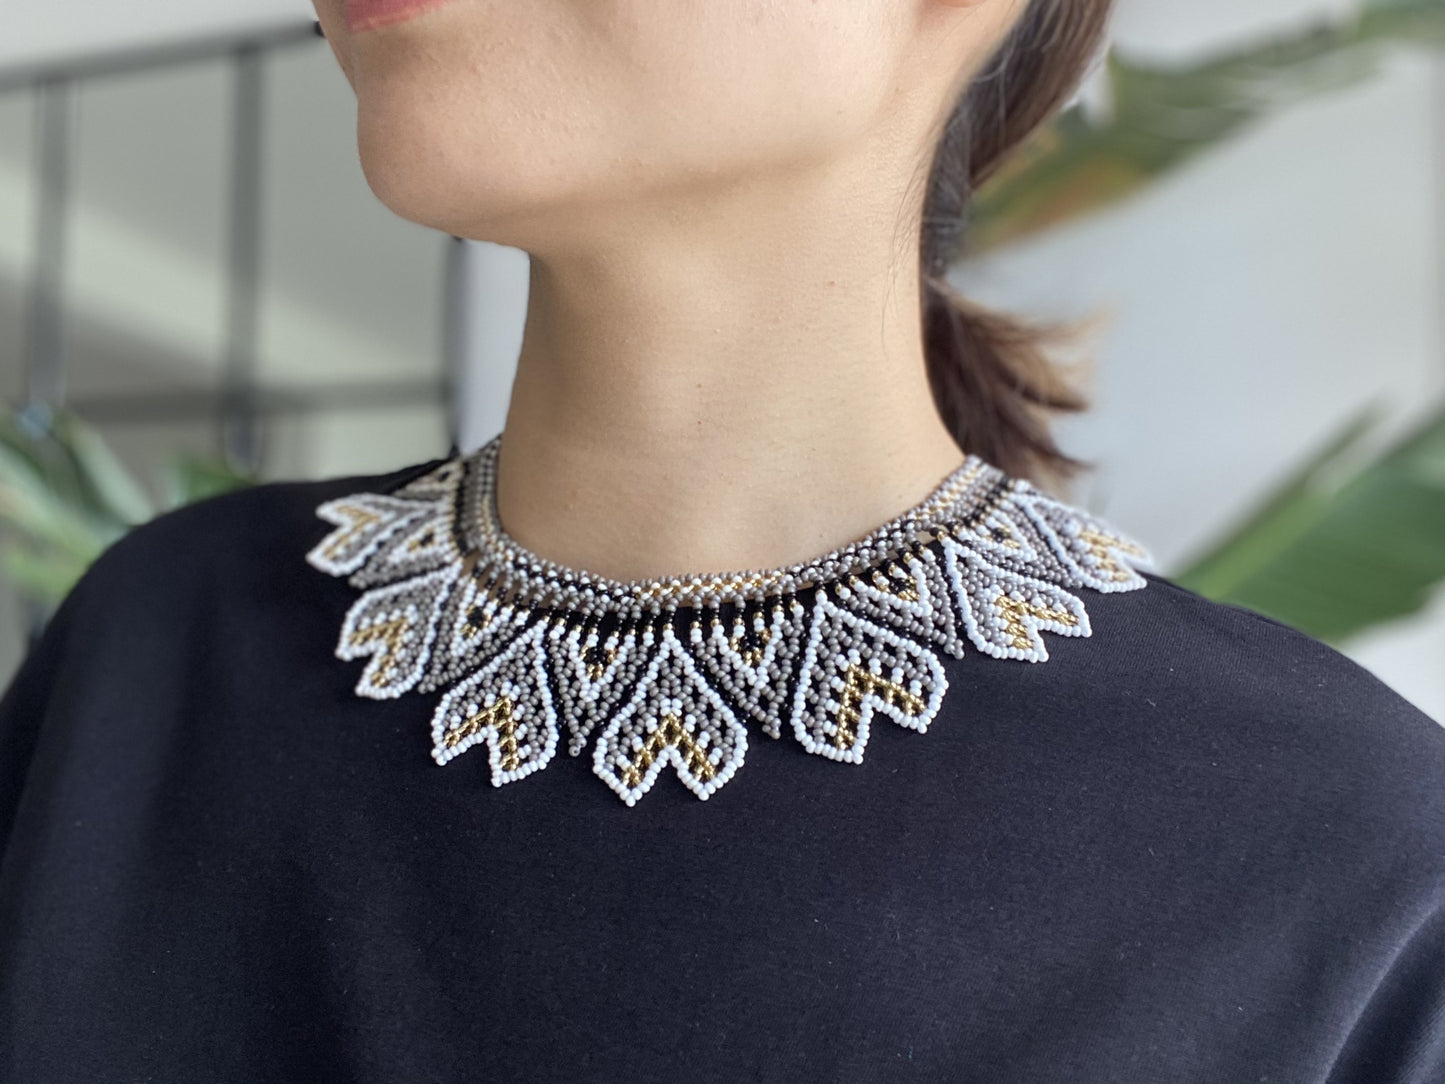 Enlace Beads Collar Necklace / Amour